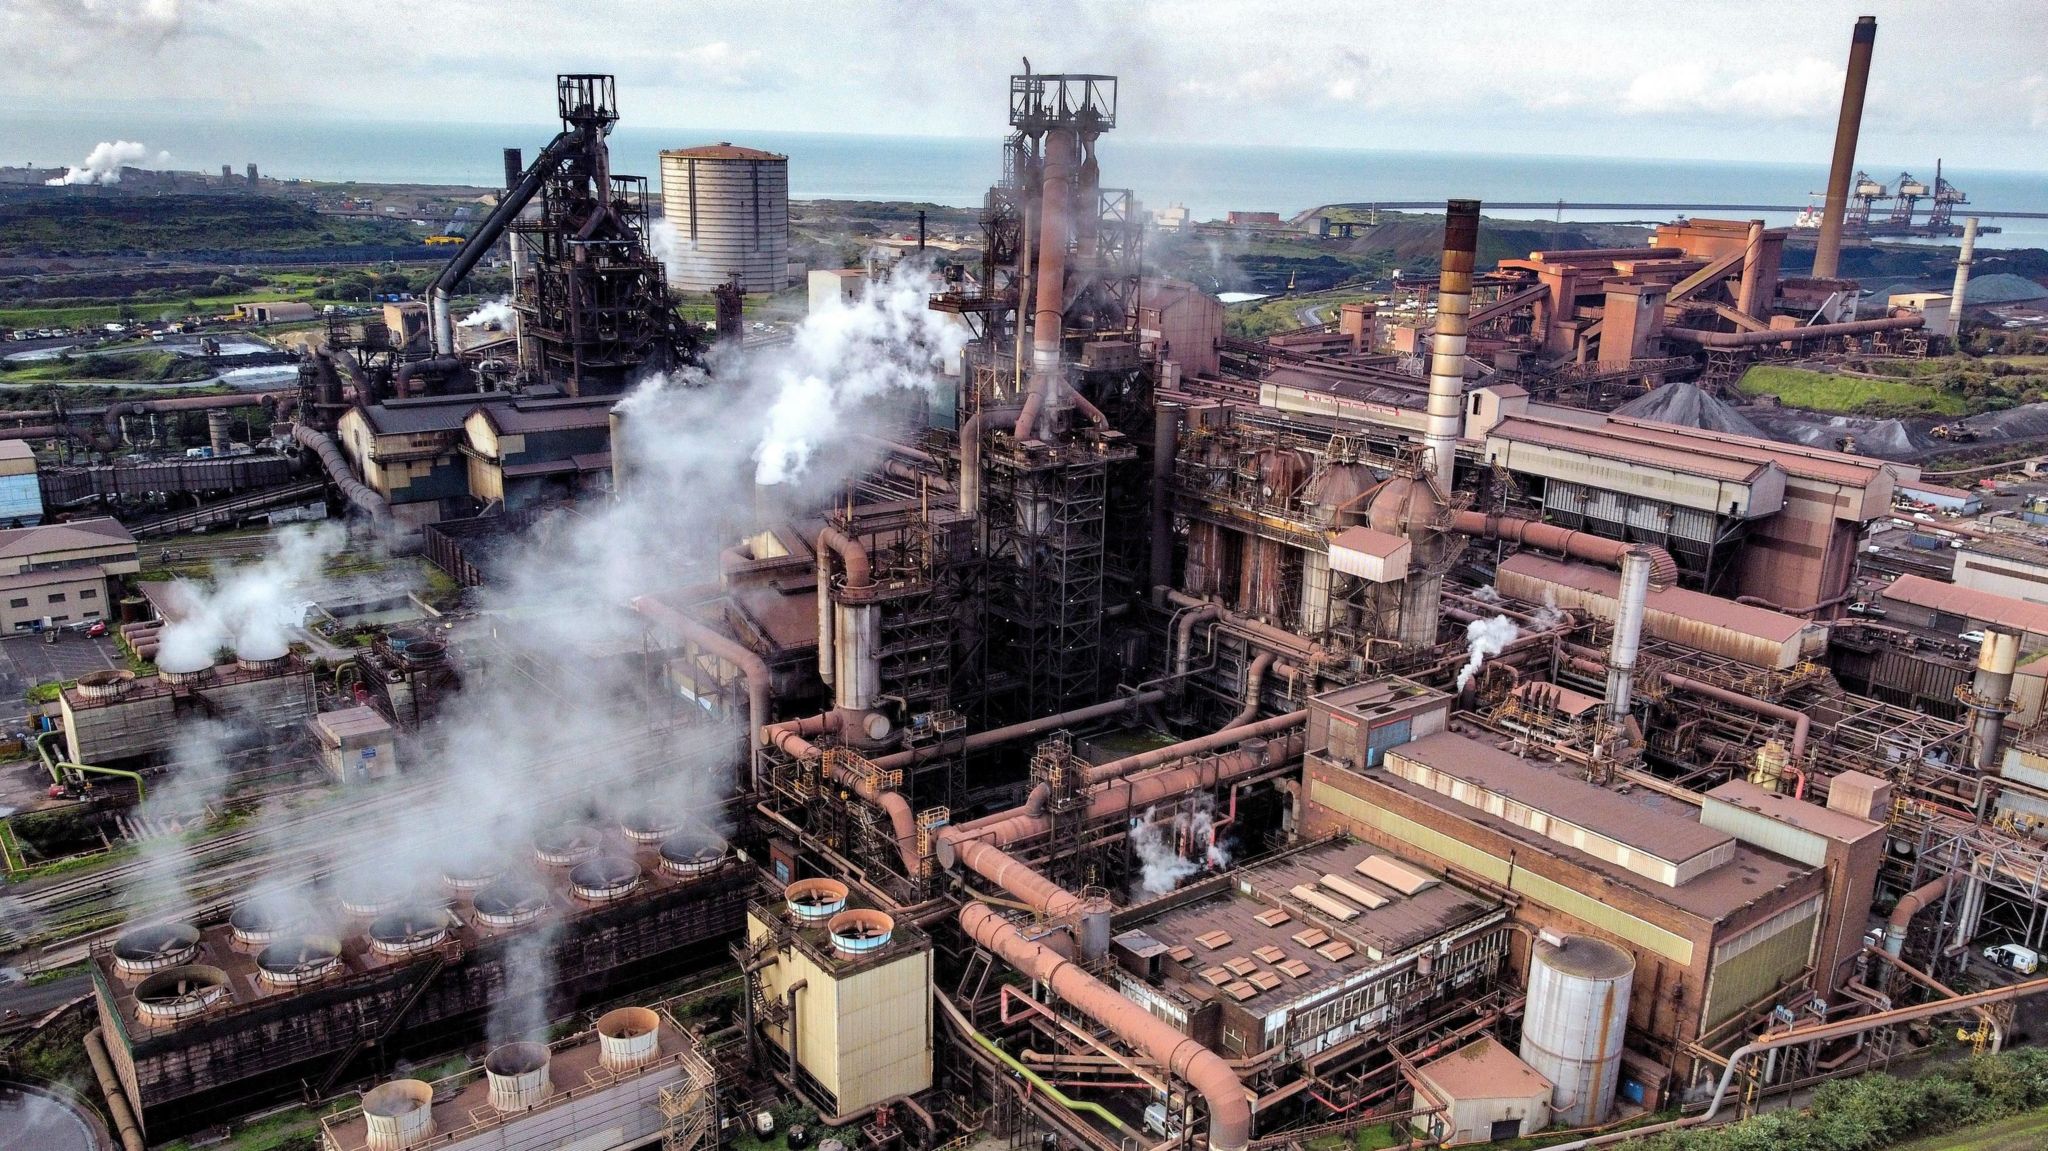 The Port Talbot steelworks with smoke coming out of the furnaces